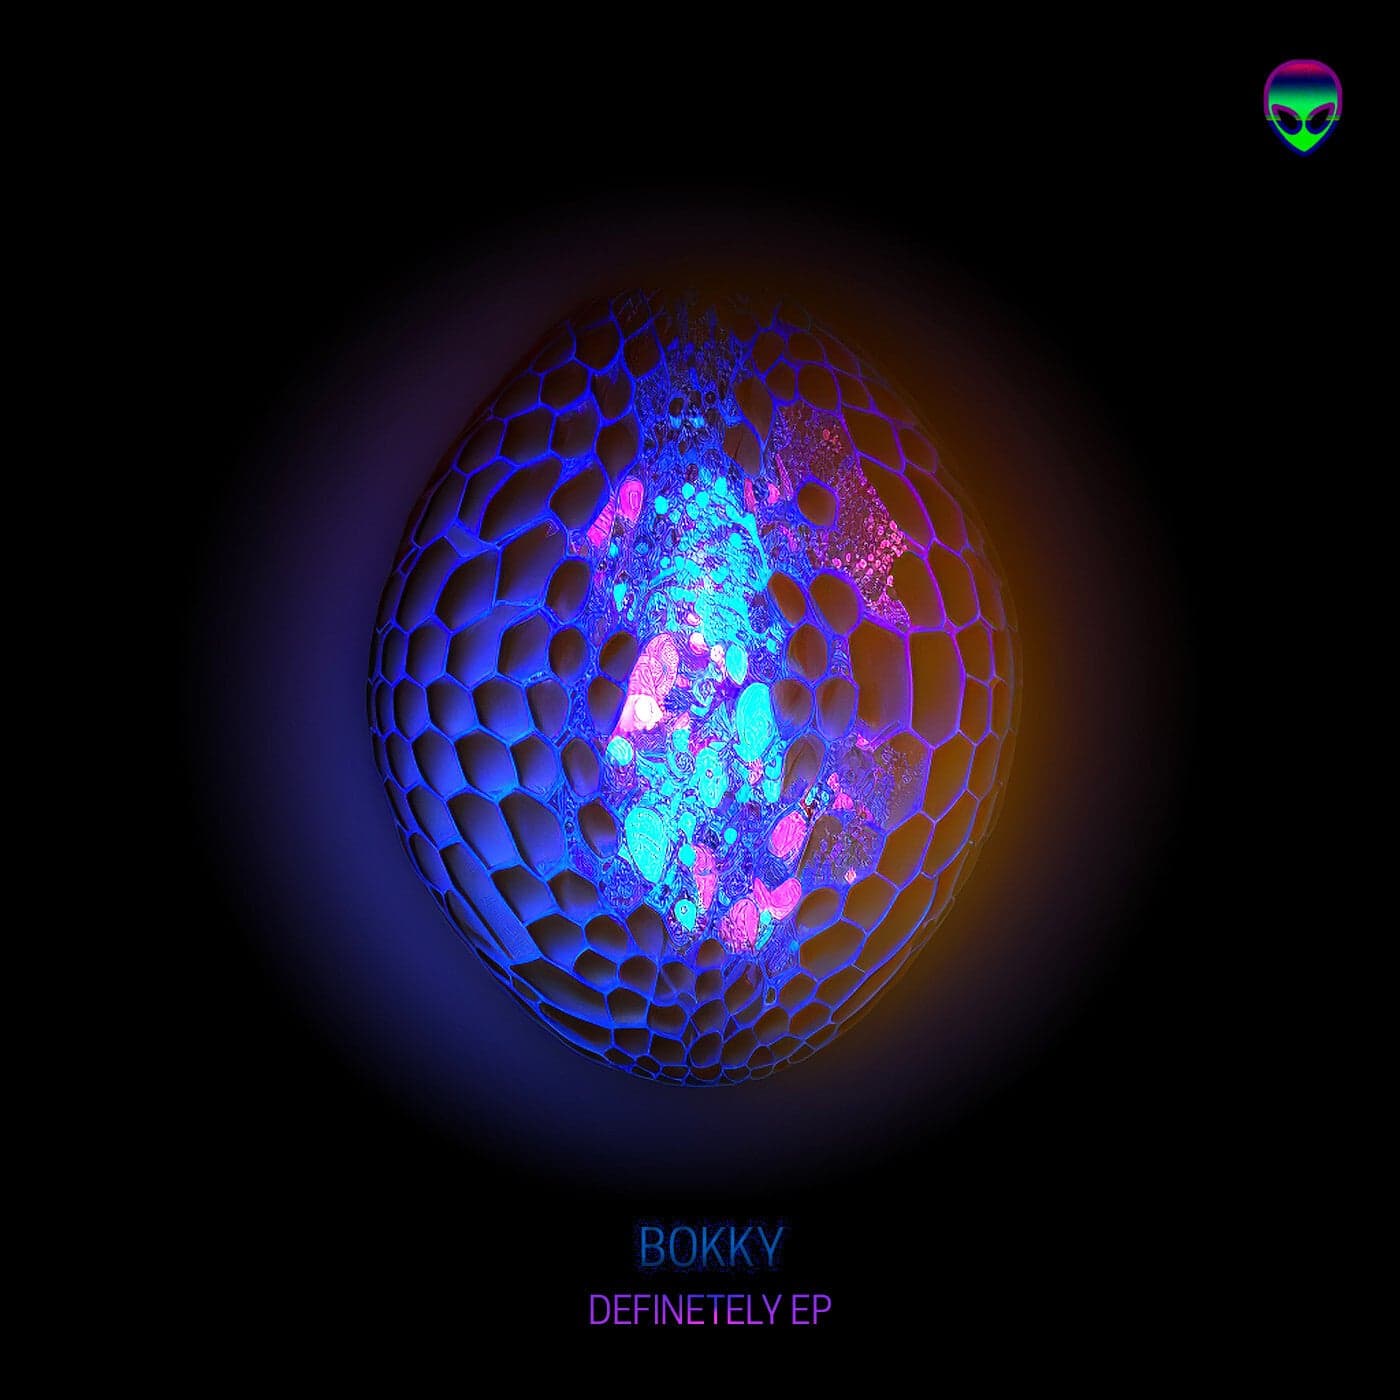 image cover: Bokky - Definetely EP on Psy4Aliens